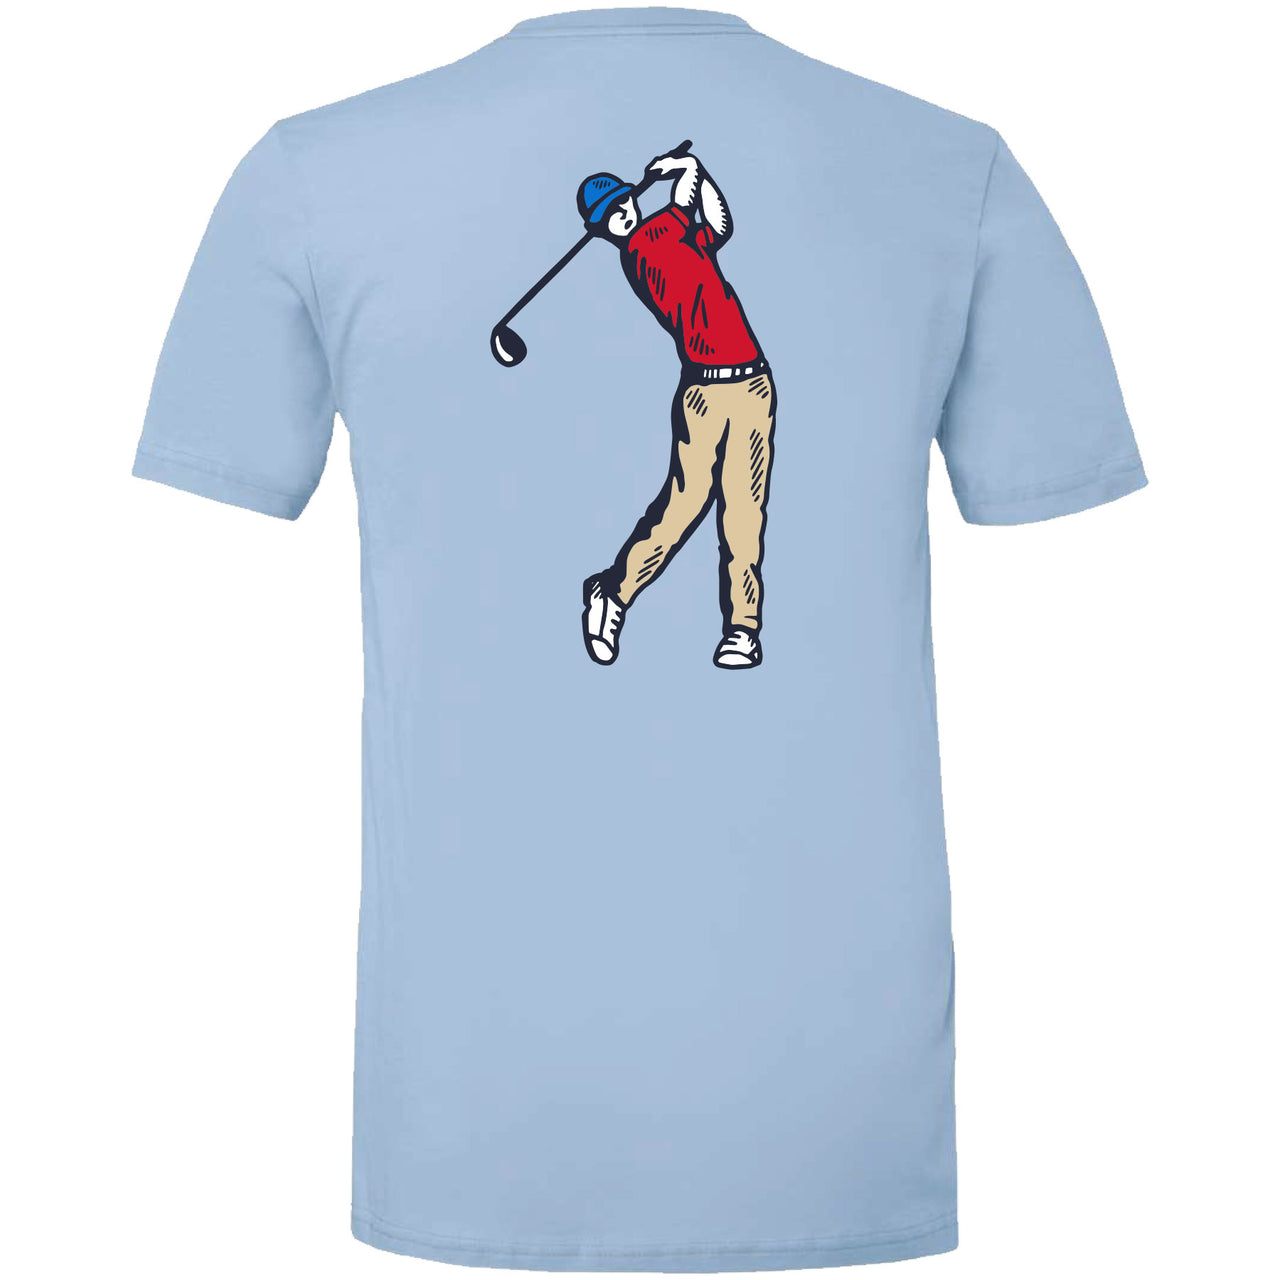 Michelob Ultra - Golf Outing 2-sided T-shirt